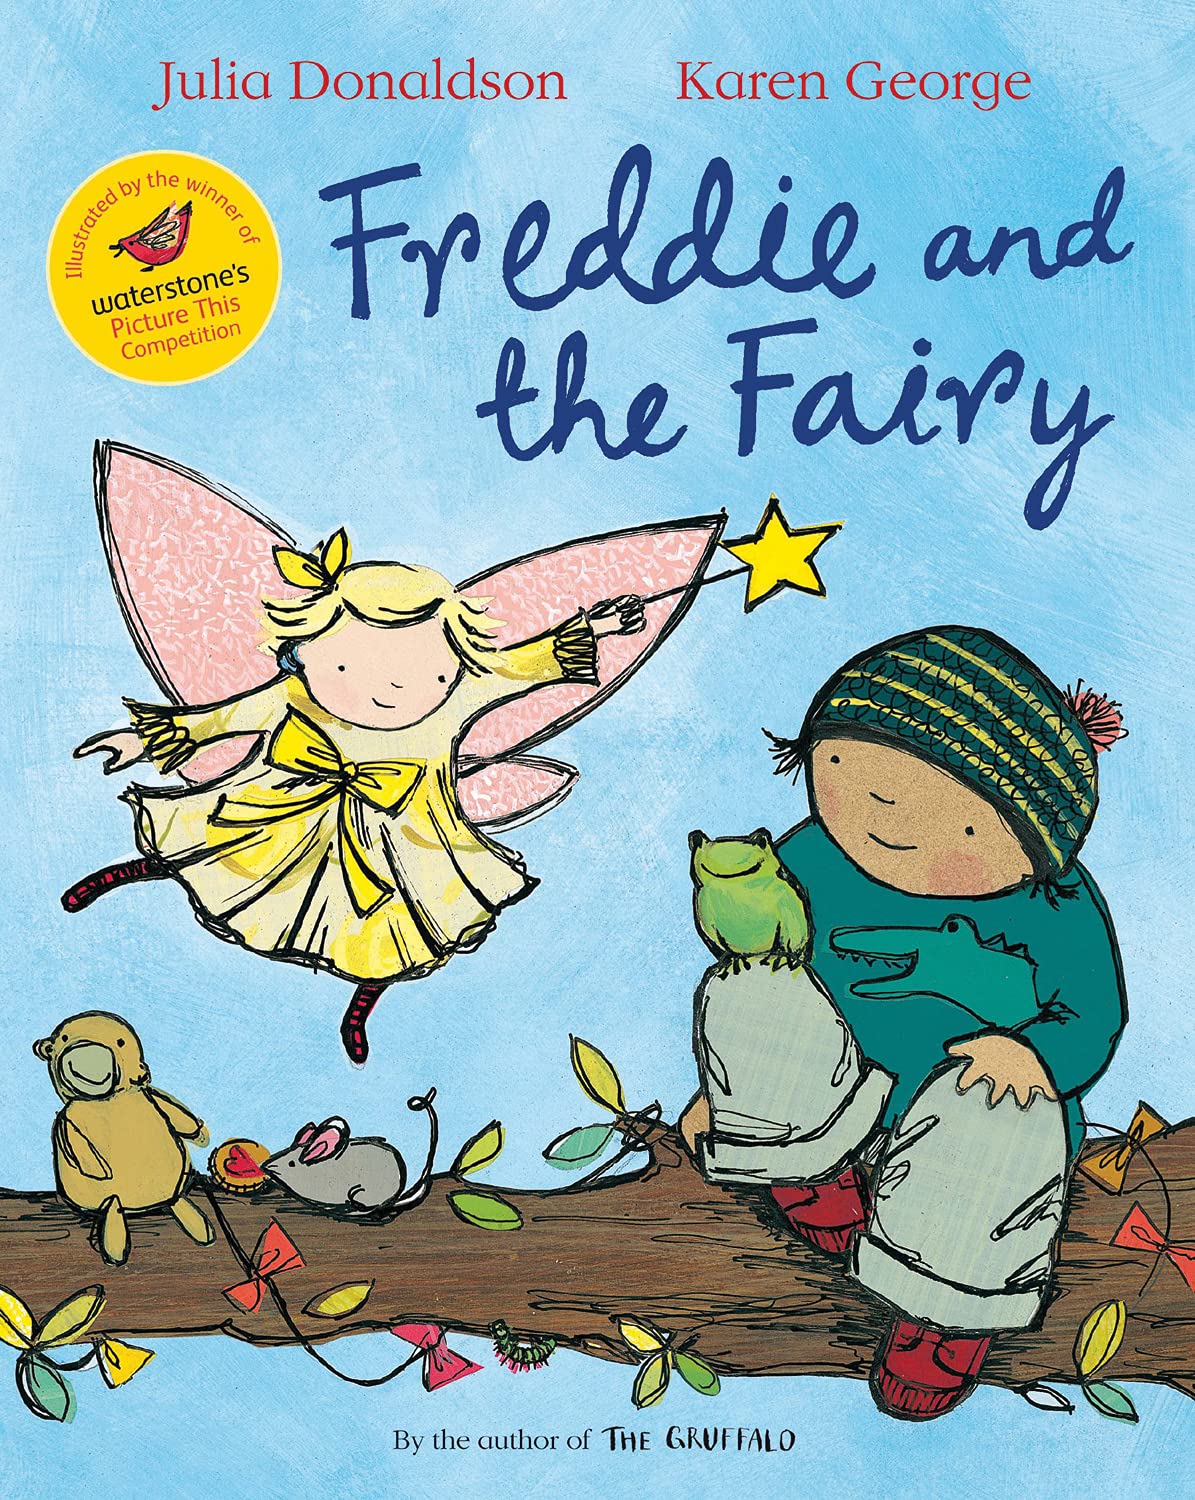 IMG : Freddie and the Fairy